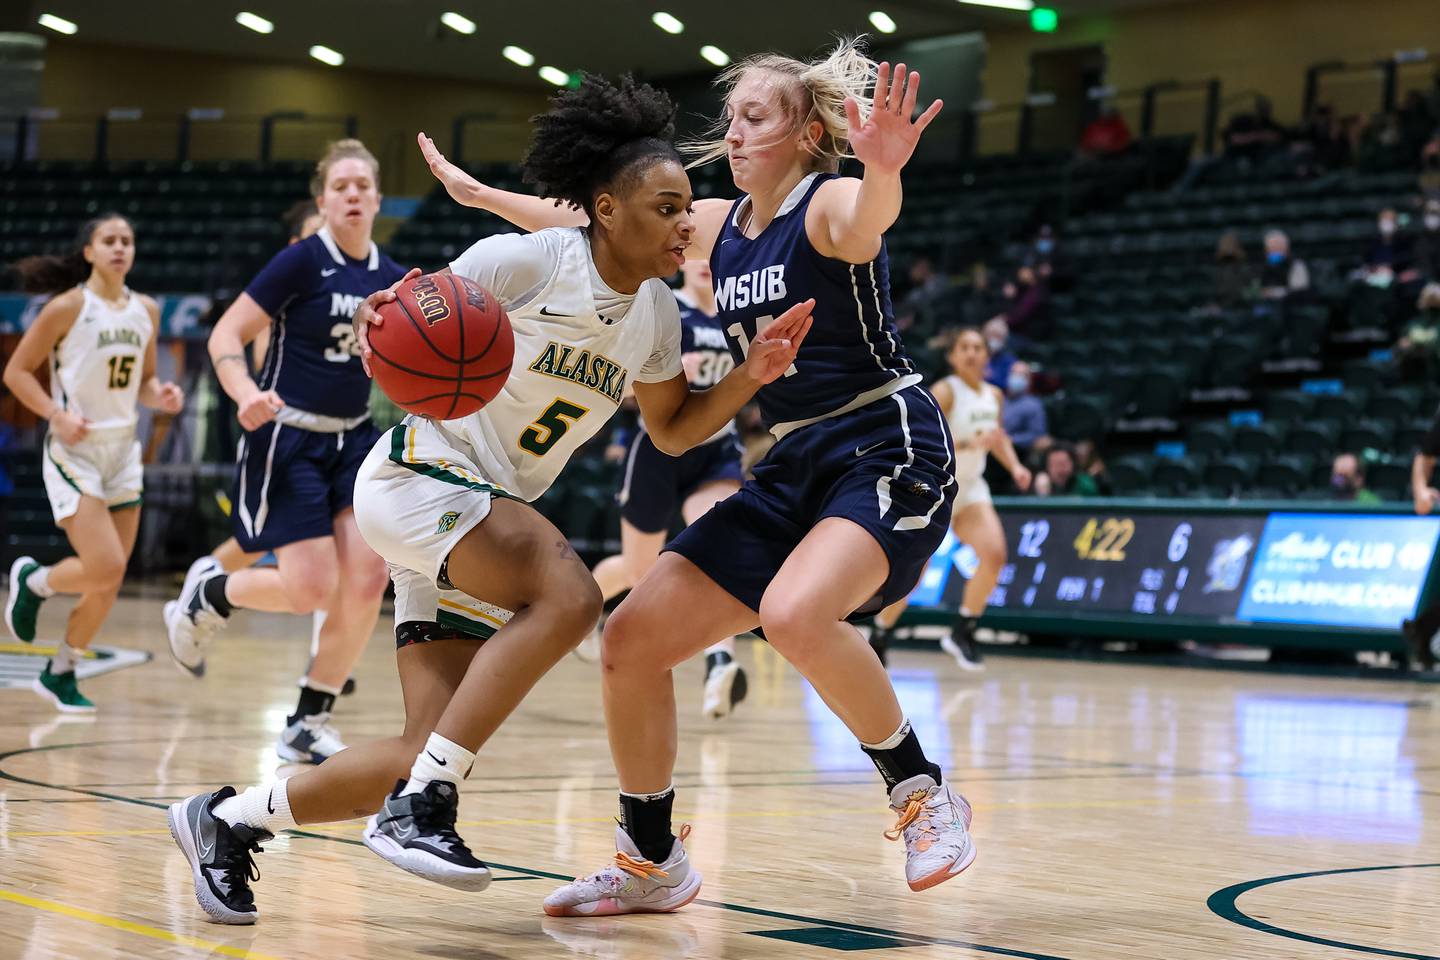 UAA's Jazzpher Evans drives to the basket in a game against Montana State University-Billings